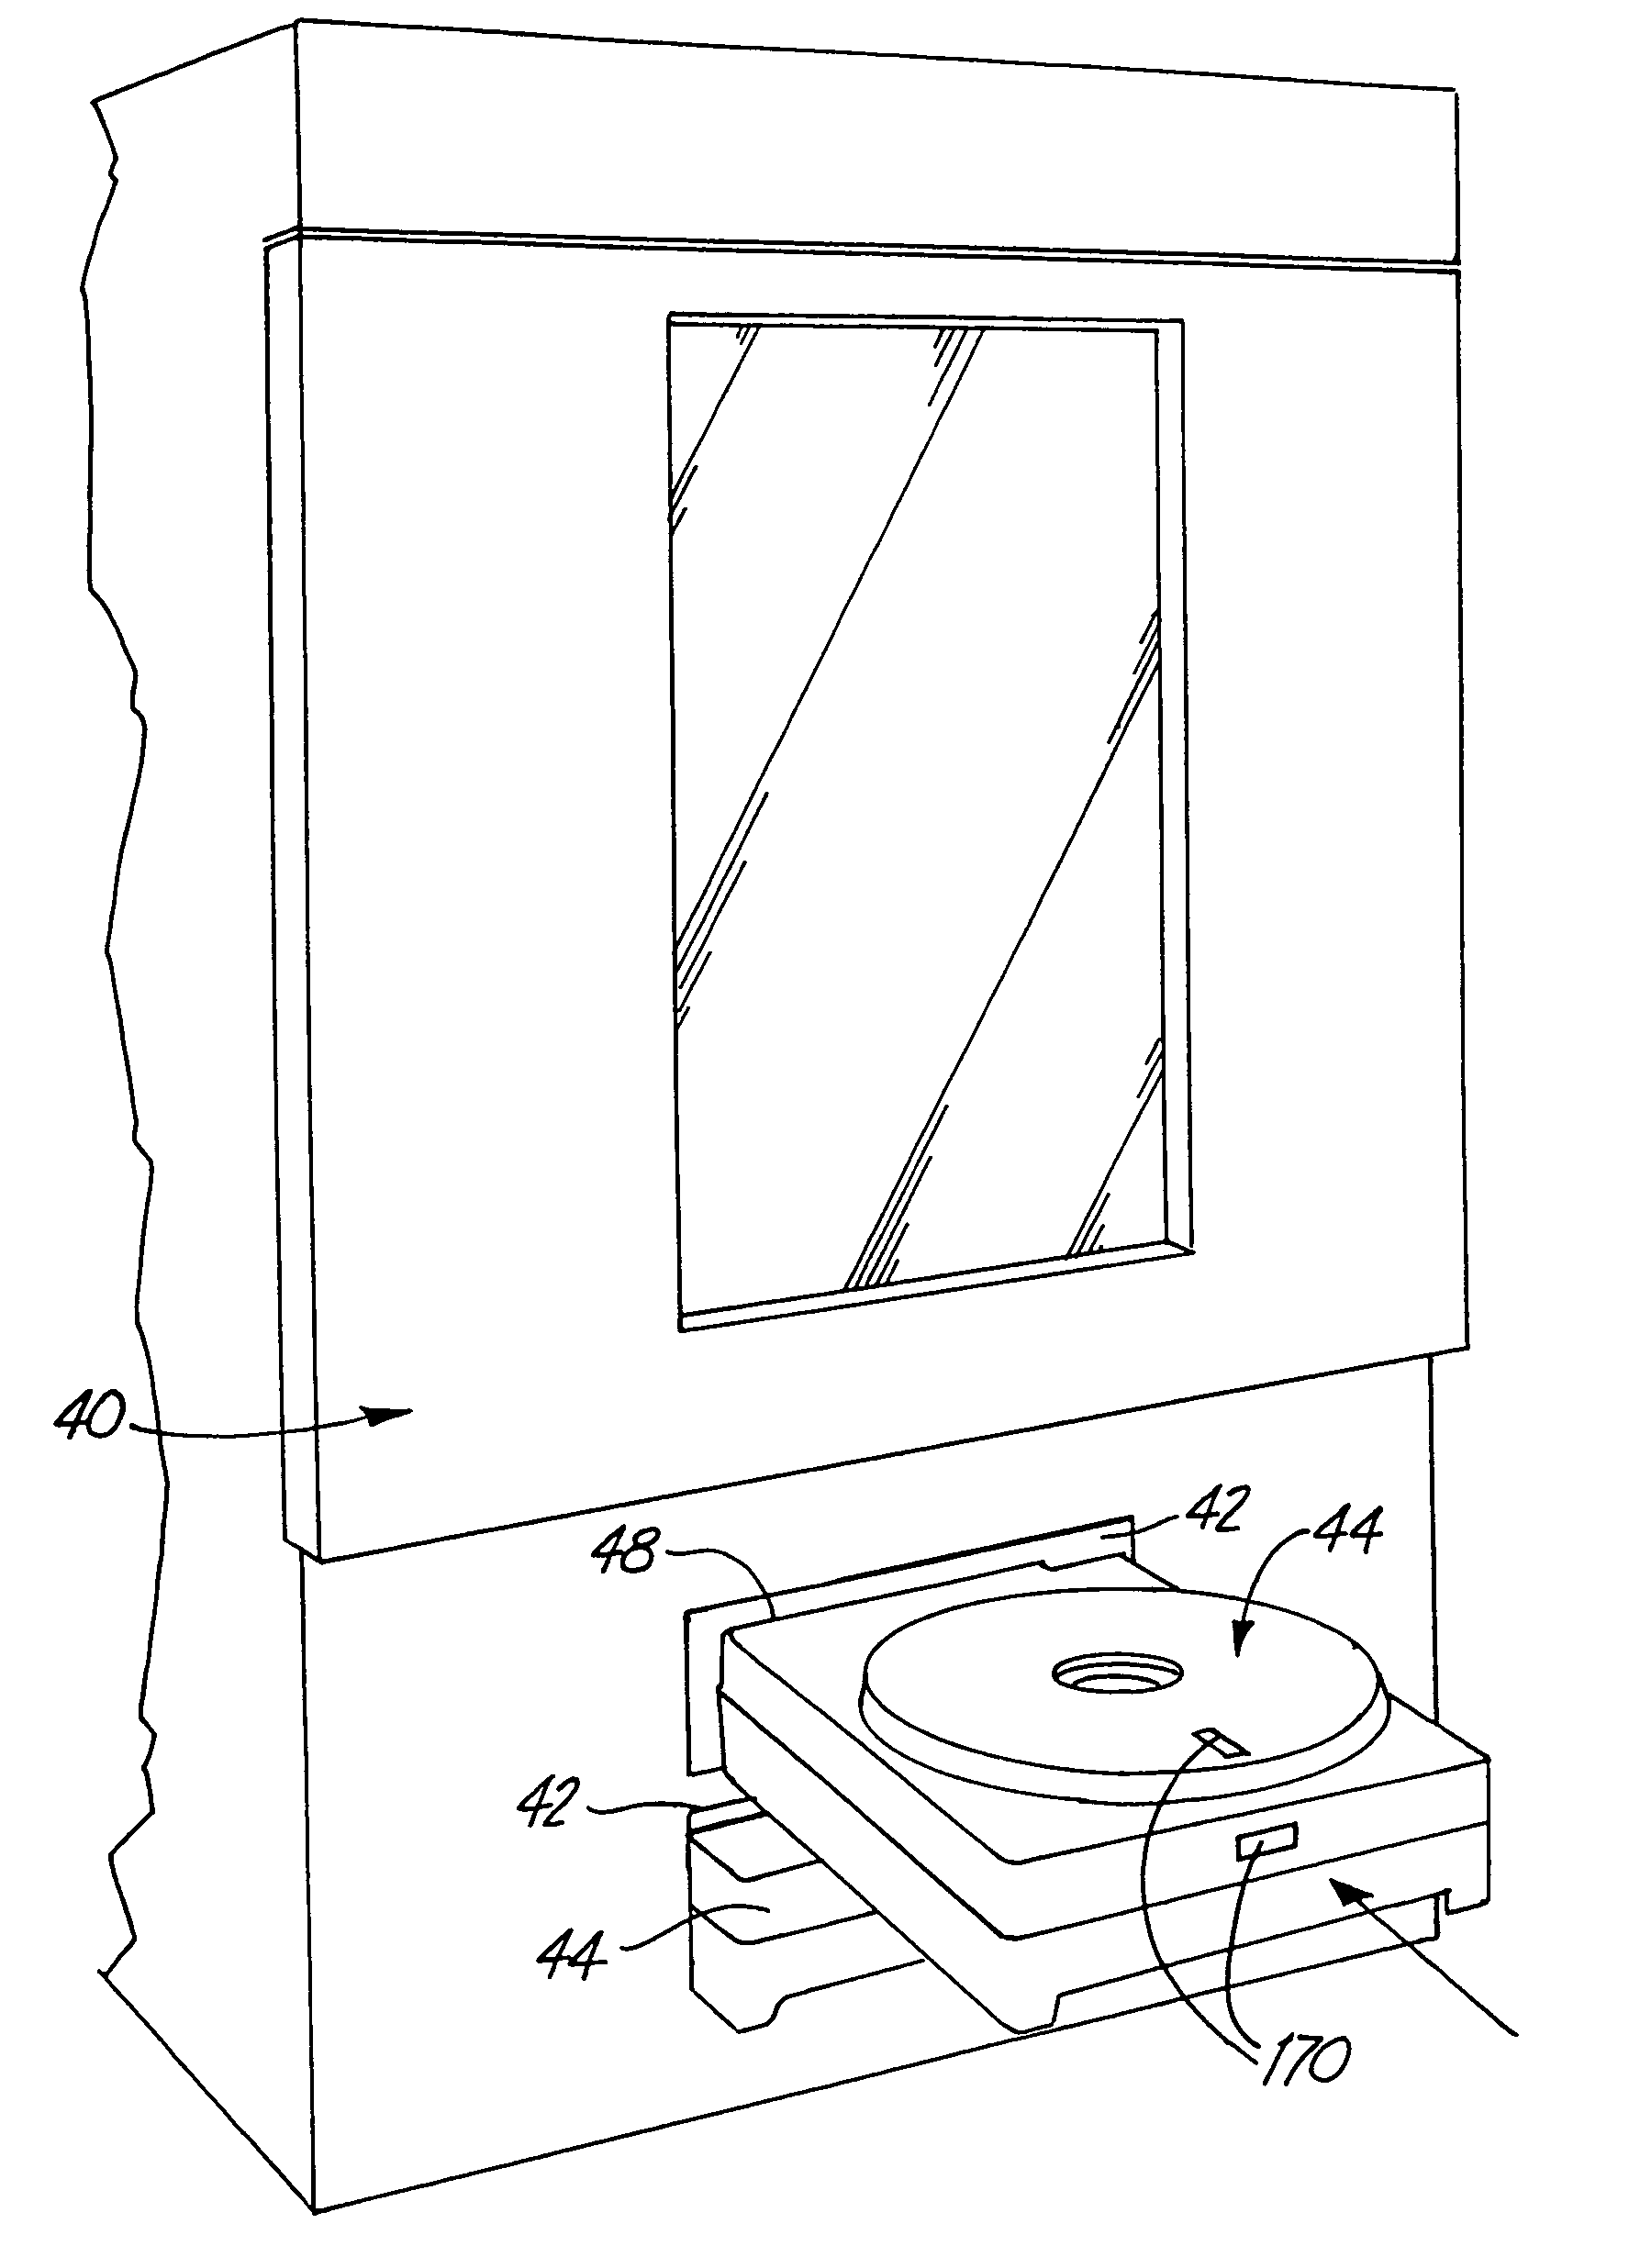 Method for loading filament in an extrusion apparatus